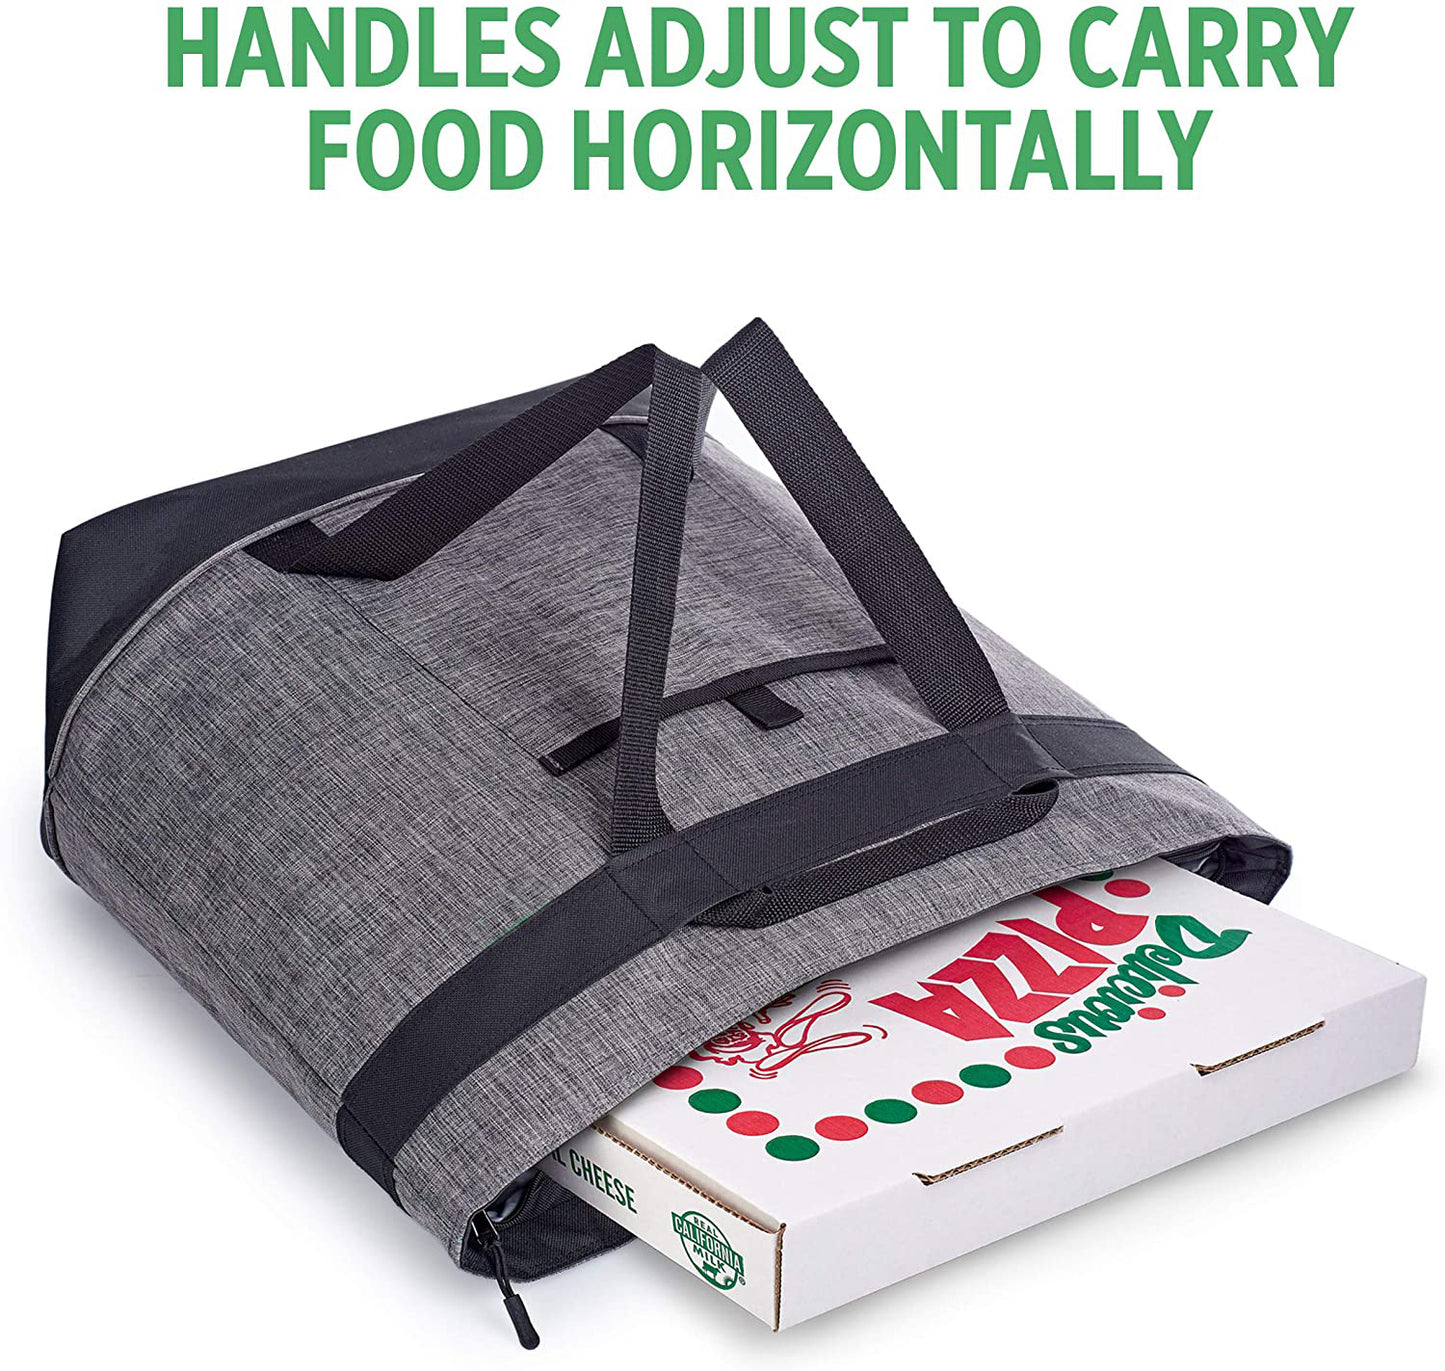 Premium Quality Soft Sided Insulated Grocery Cooler Bag